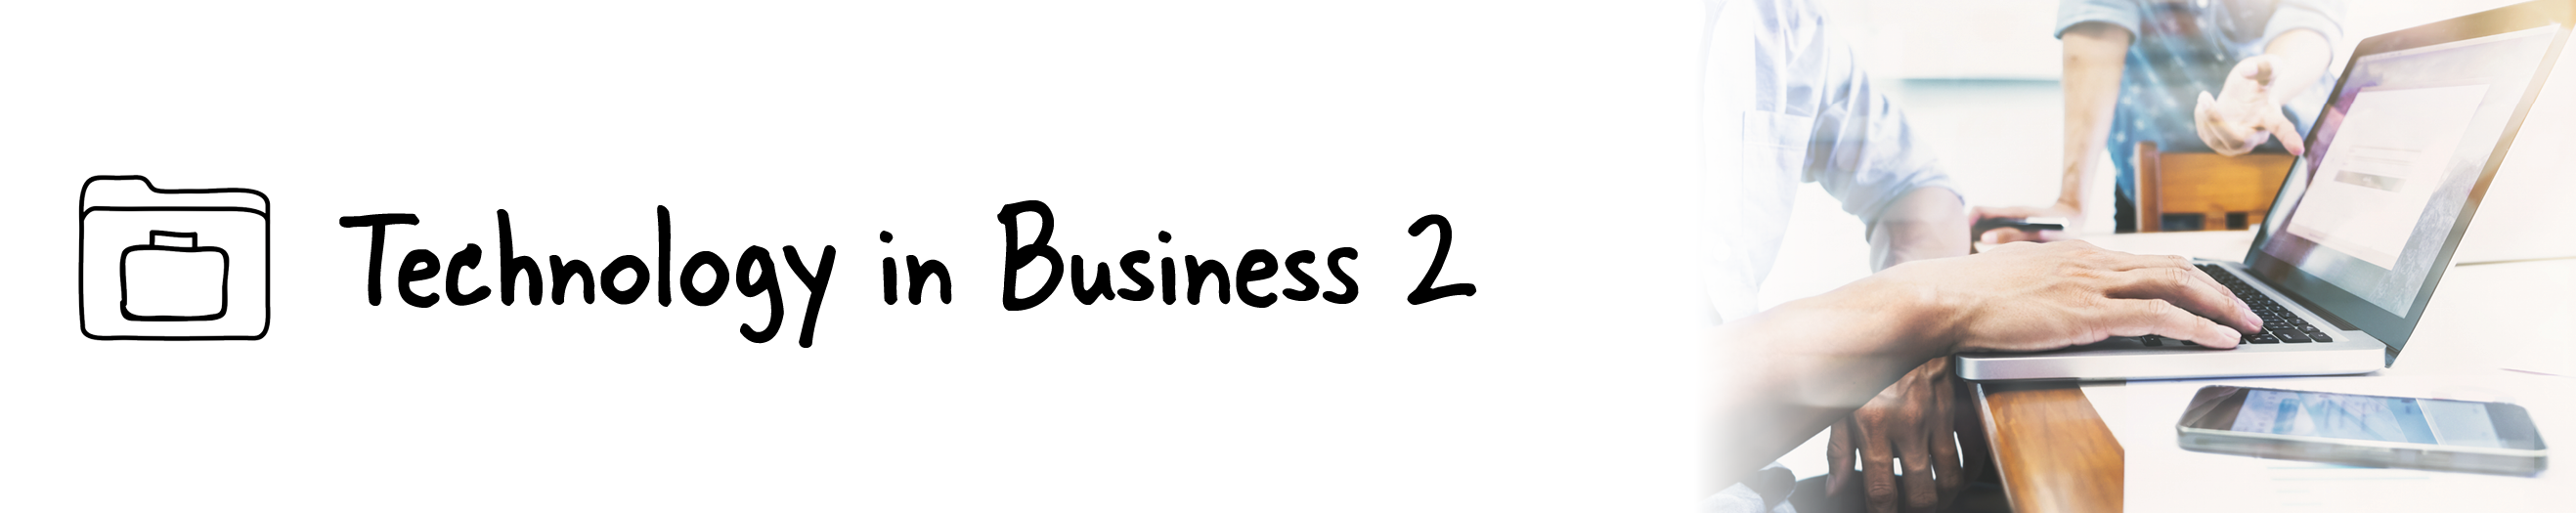 Technology in Business 2